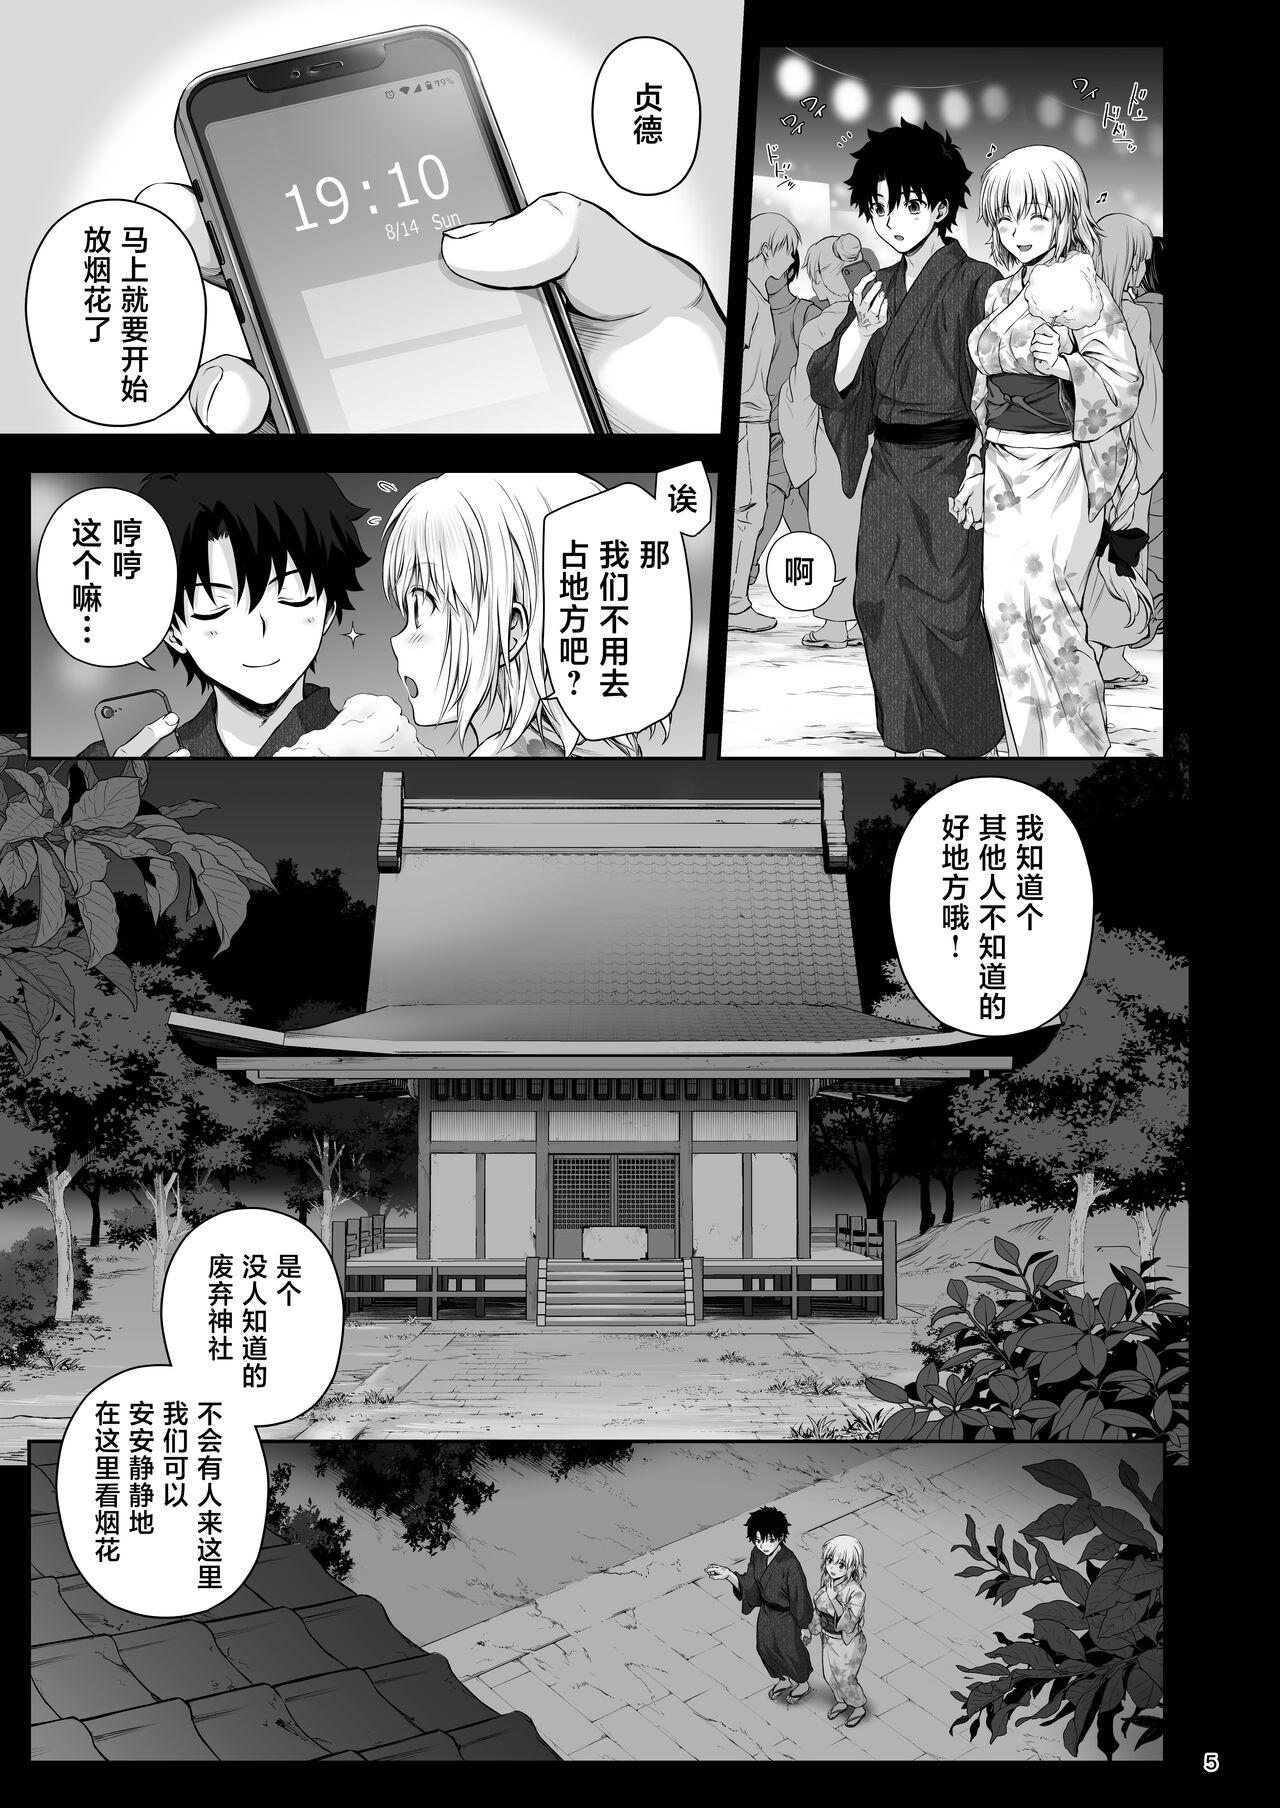 Jeanne to Natsumatsuri no Yoru ni - On the night of Jeanne and the summer festival 5